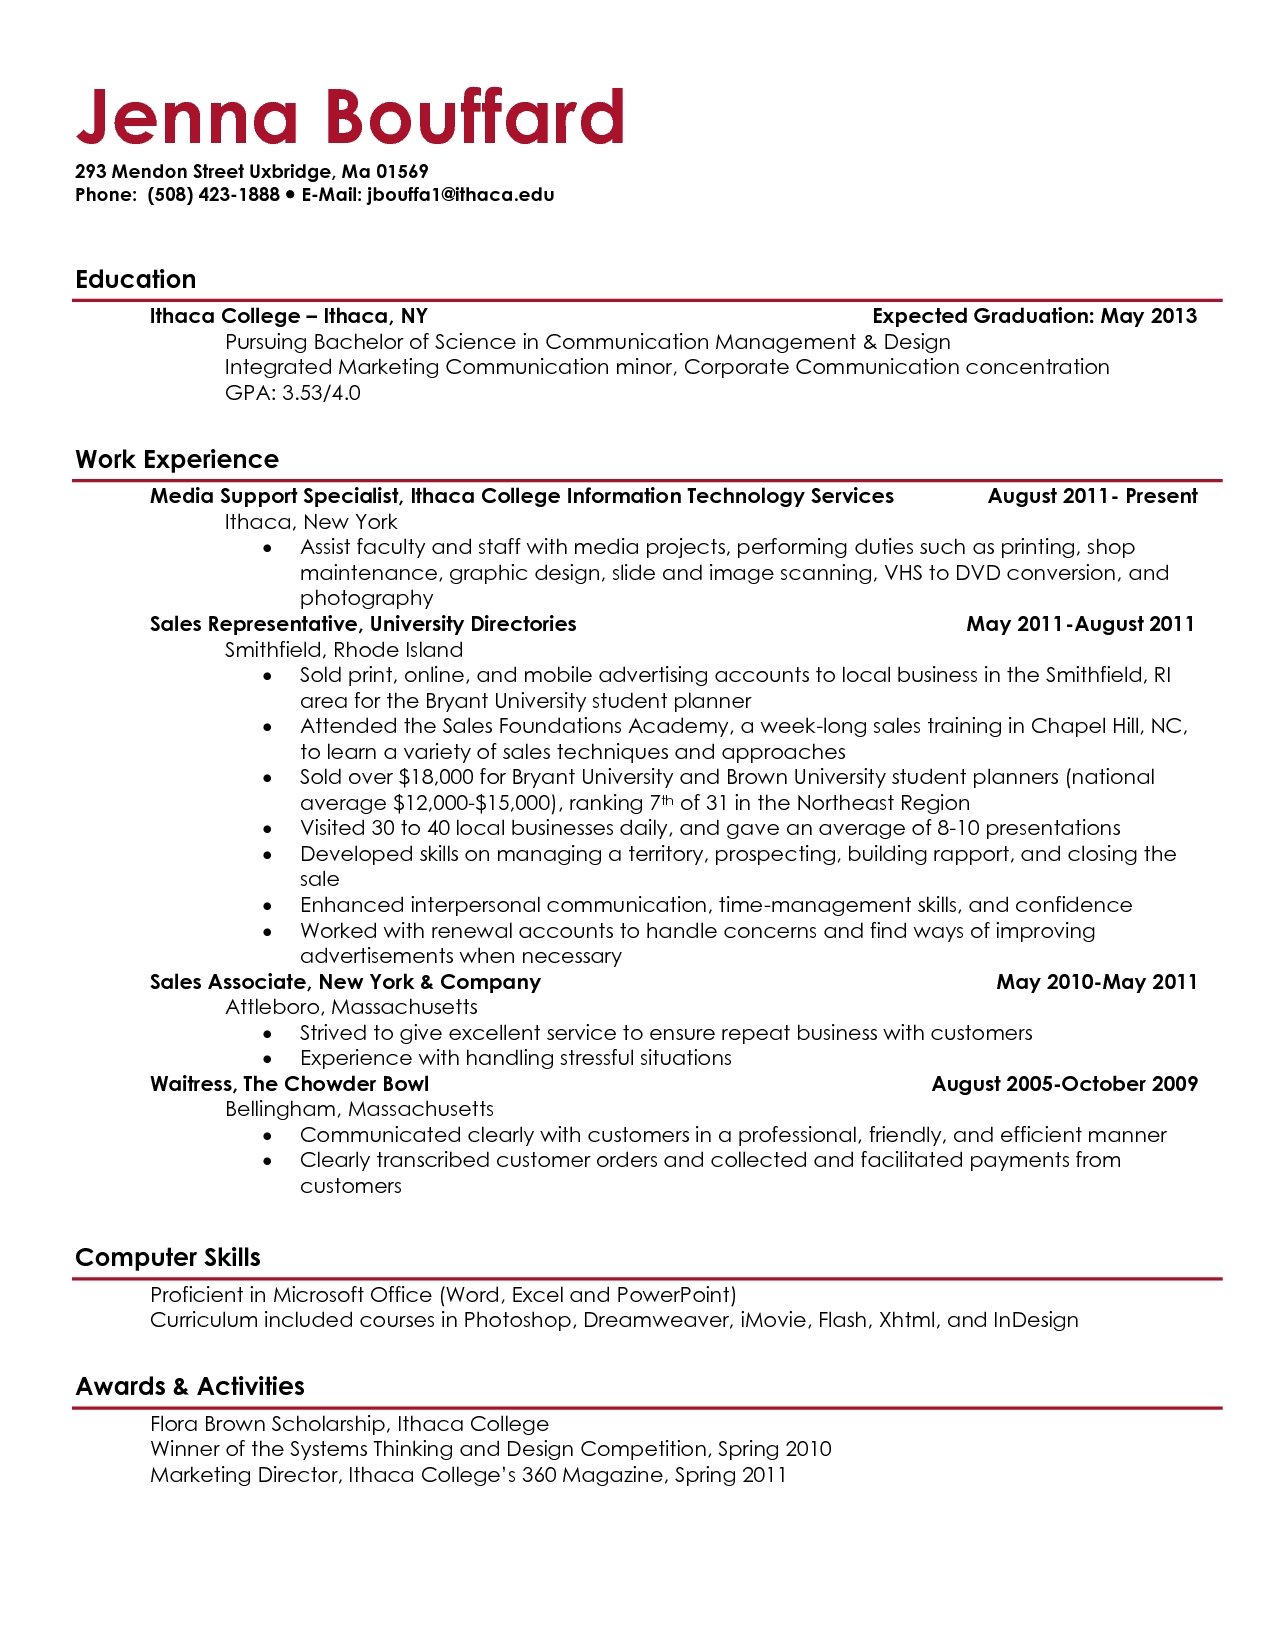 Resume for College Student